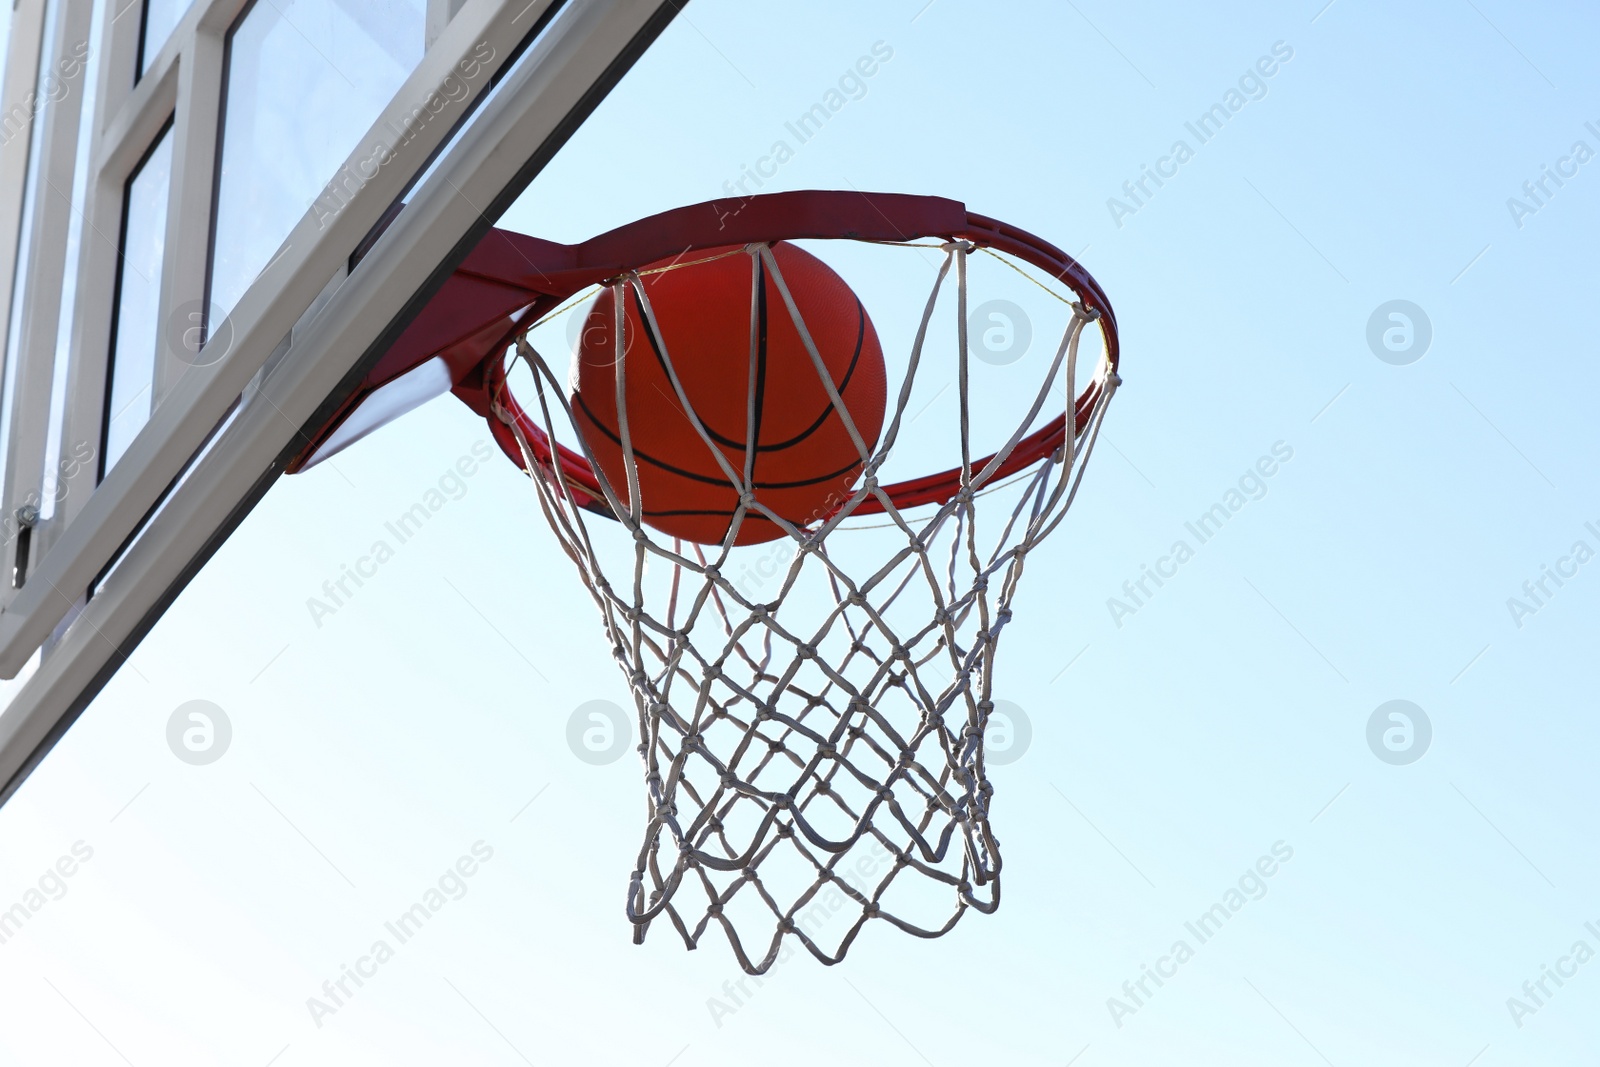 Photo of Basketball ball and hoop with net outdoors on sunny day